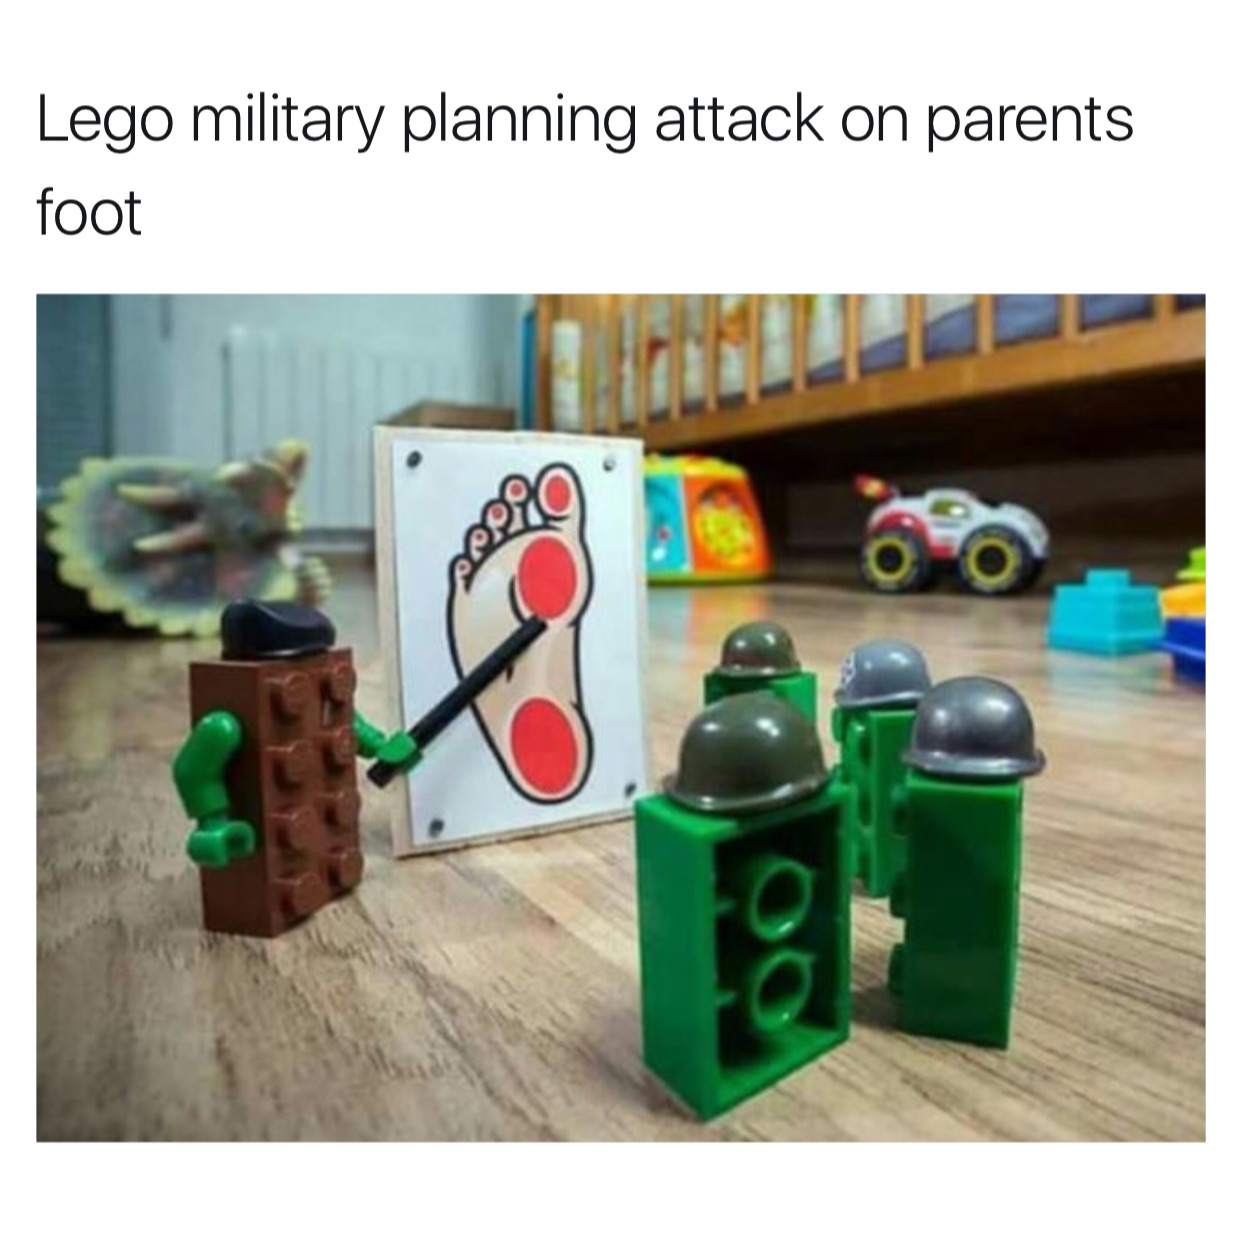 memes - foot lego - Lego military planning attack on parents foot Rio